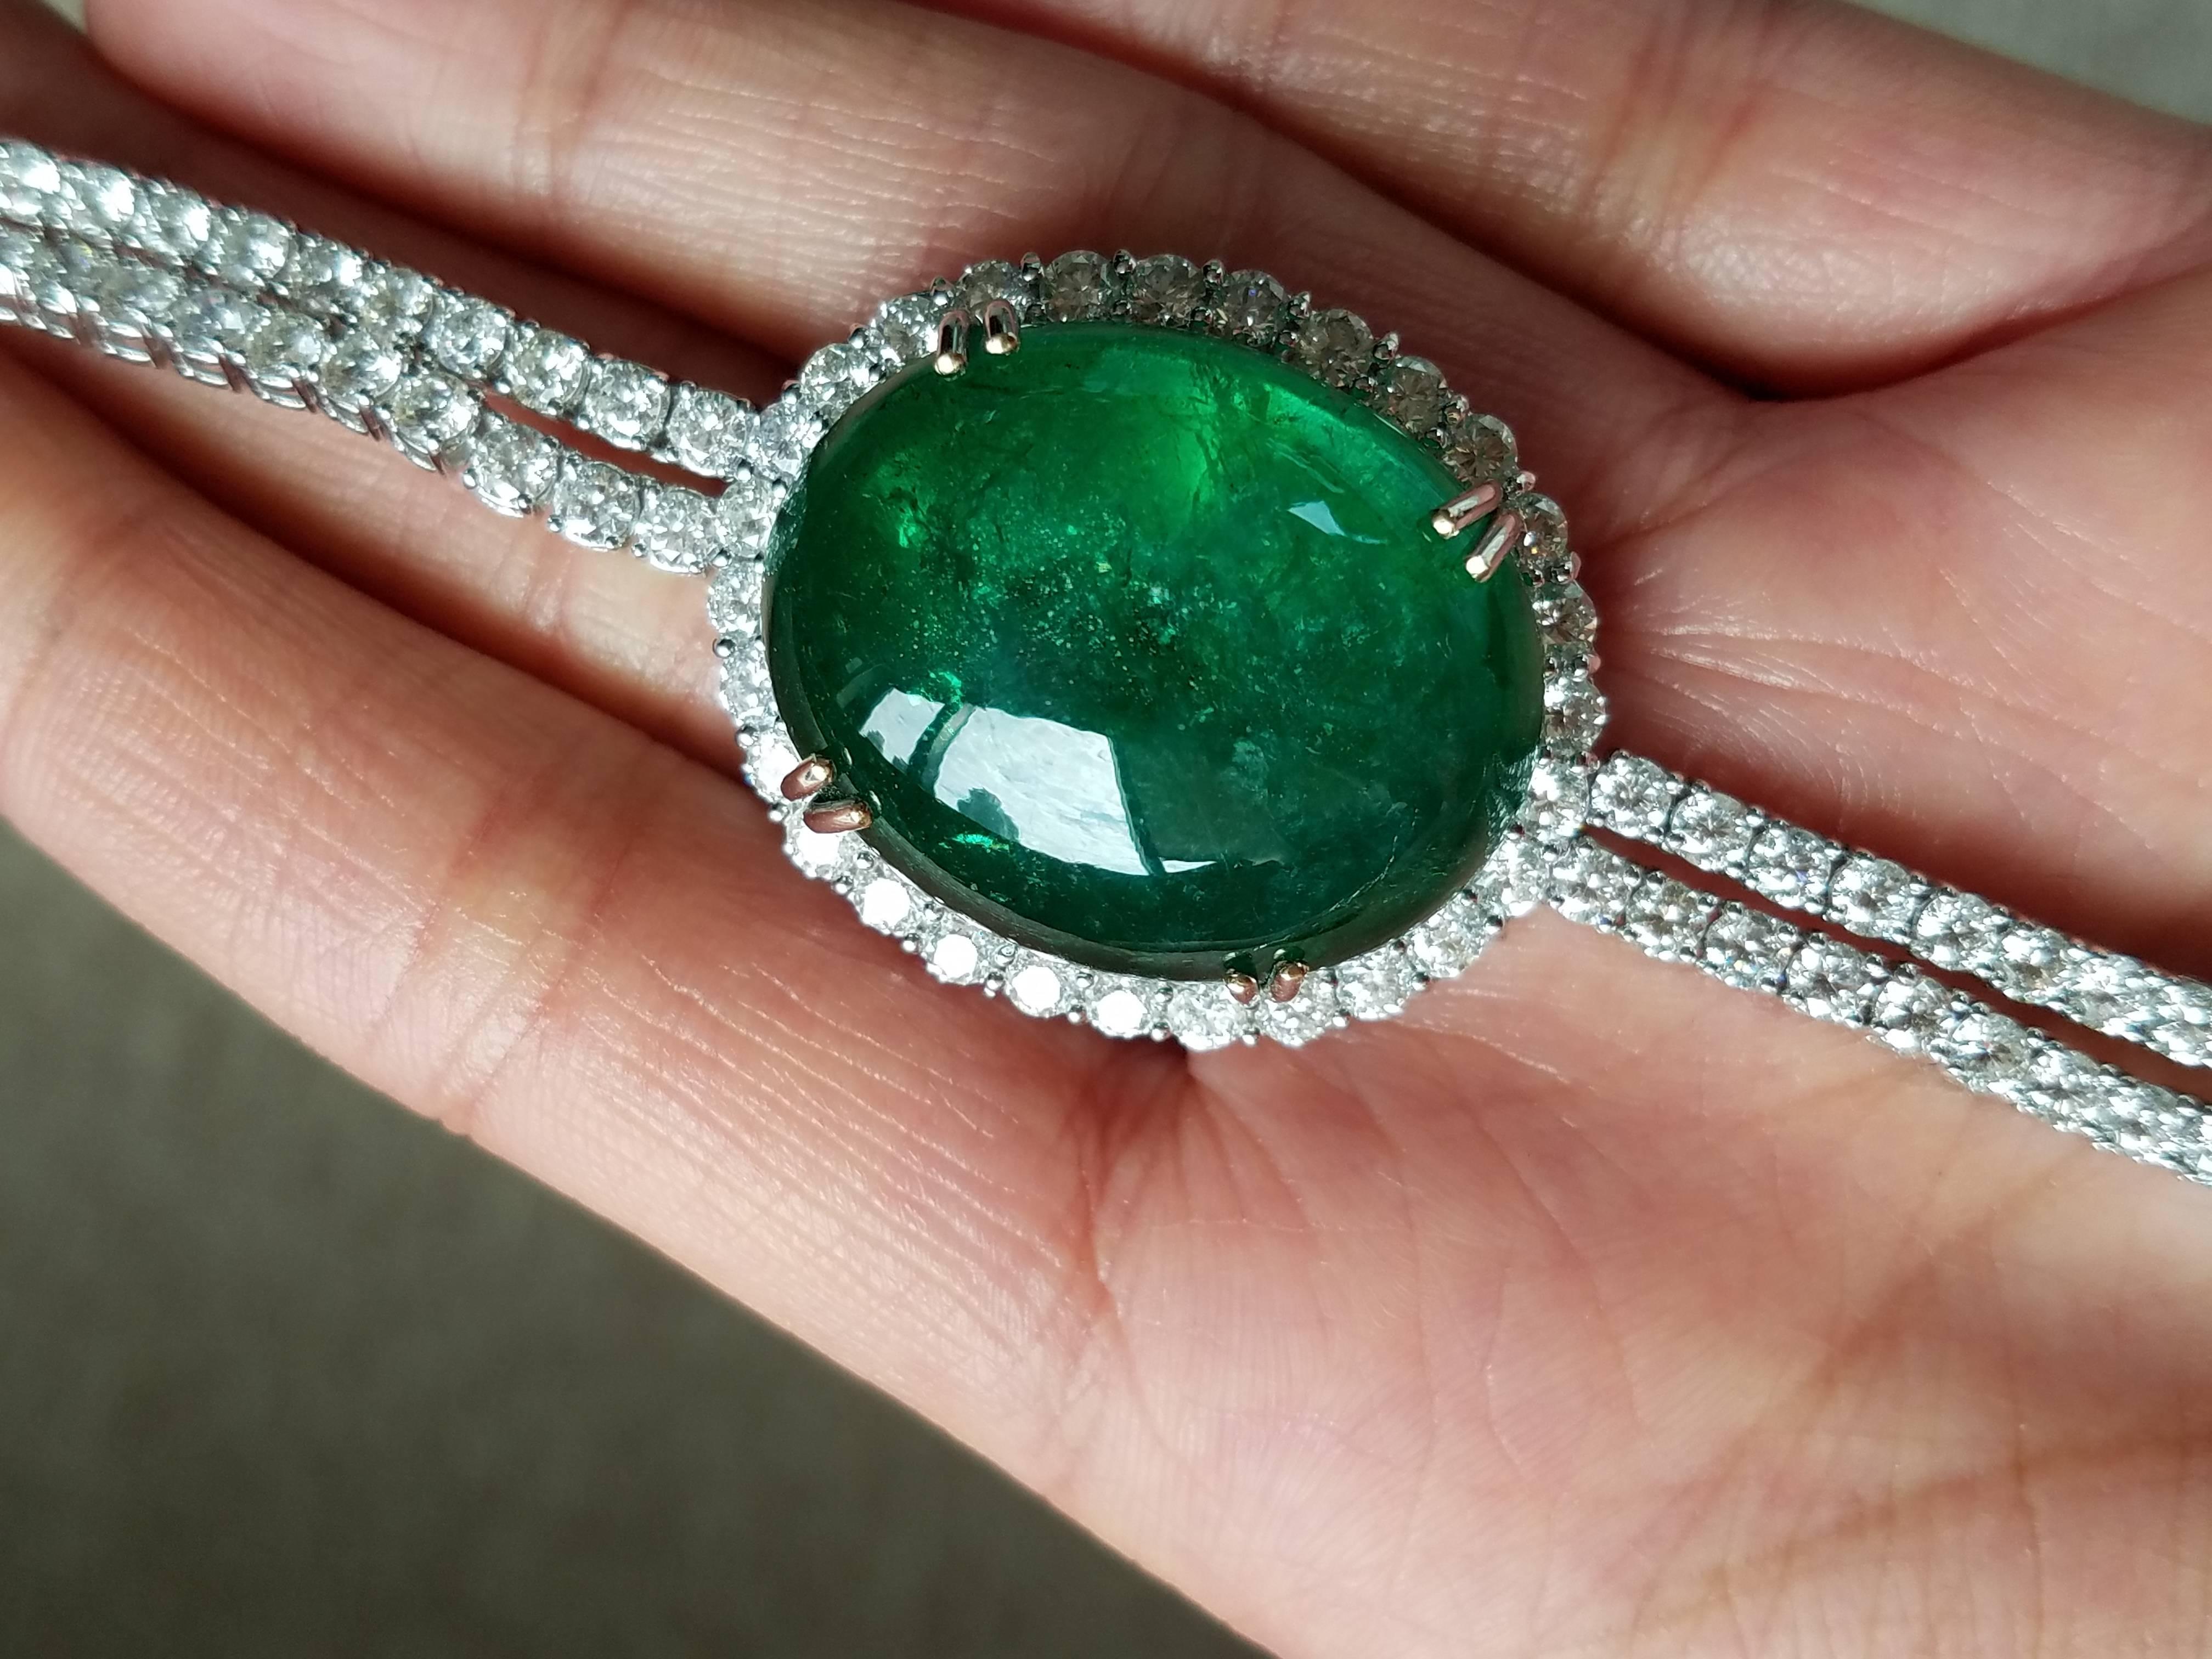 A magnificent Emerald cabochon (totalling around 45 carats) and Emerald drops necklace, with a white Diamond chain. All set in 18K  White Gold.  

Stone Details: 
Stone: Zambian Emerald
Carat Weight: 57.70 carats

Diamond Details: 
Total Carat